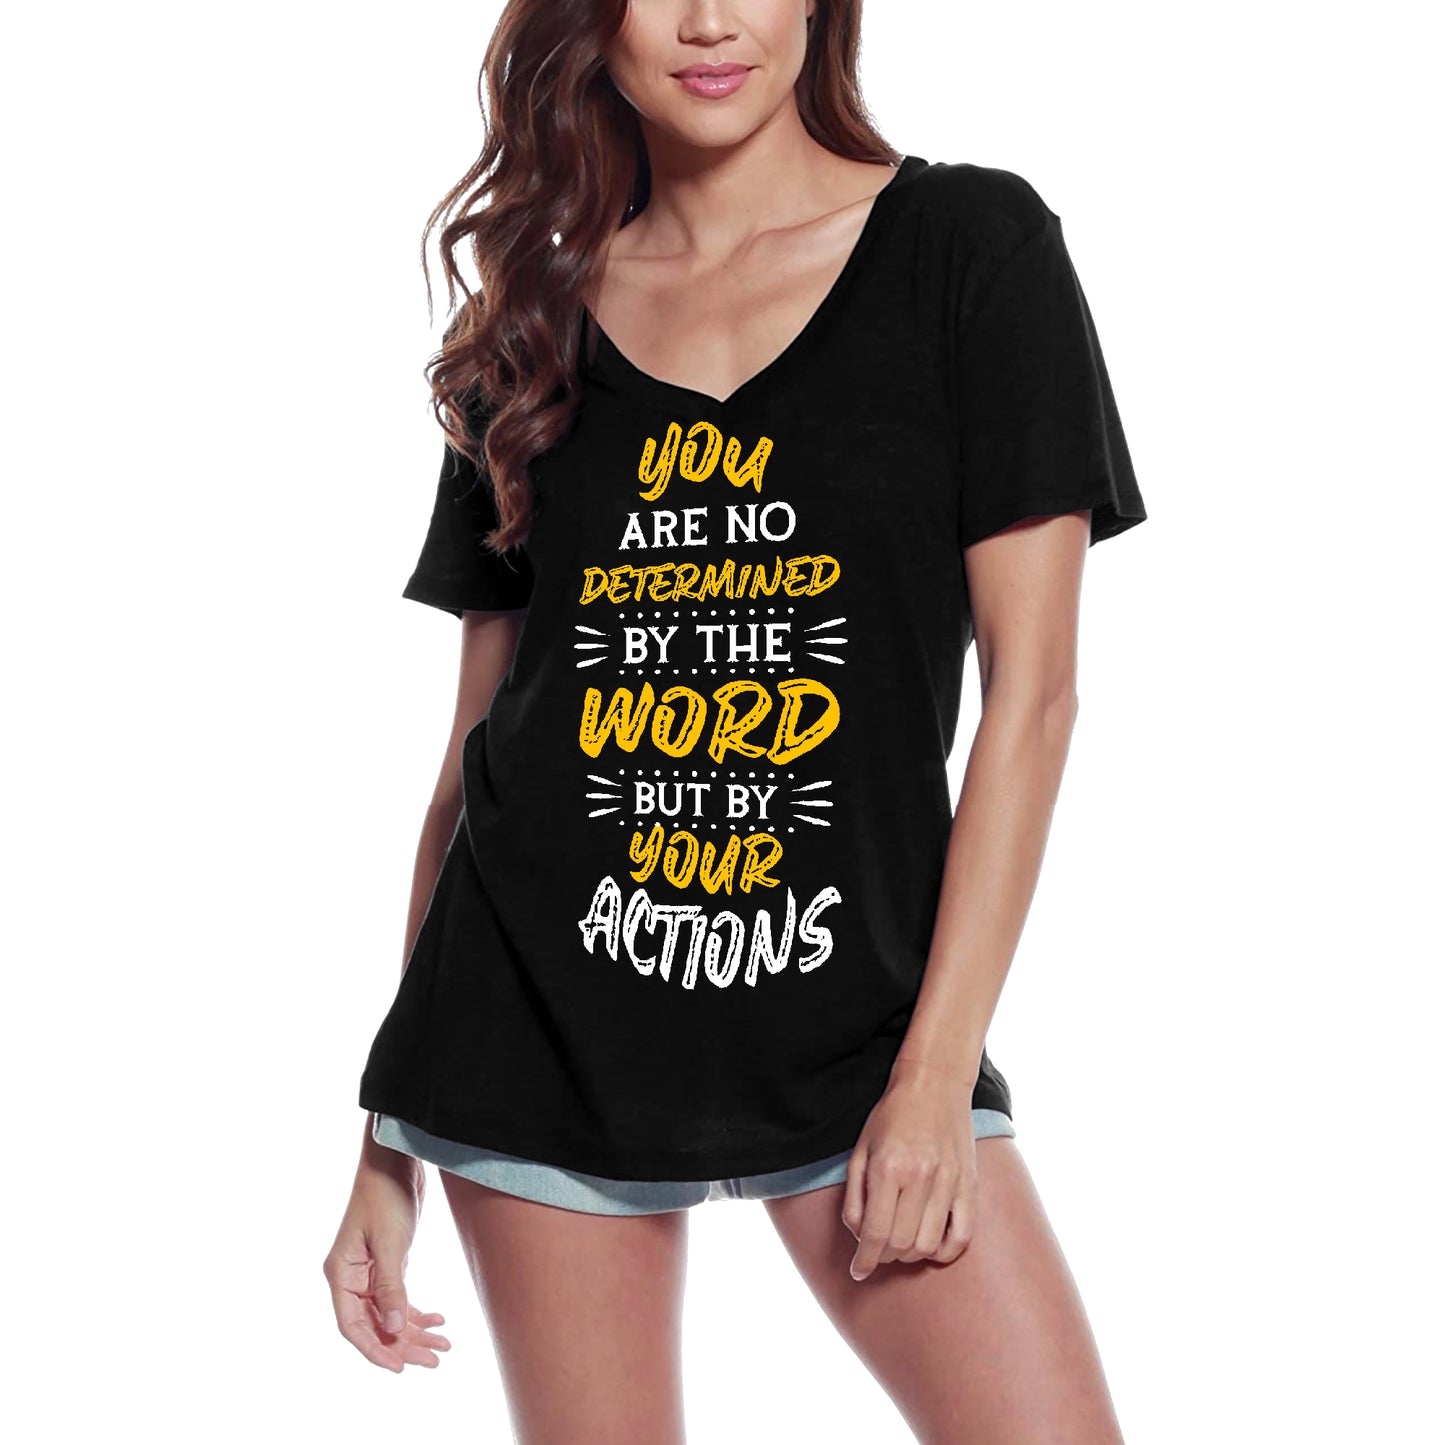 ULTRABASIC Women's T-Shirt Not Determined by Word but by Your Action - Quote Shirt